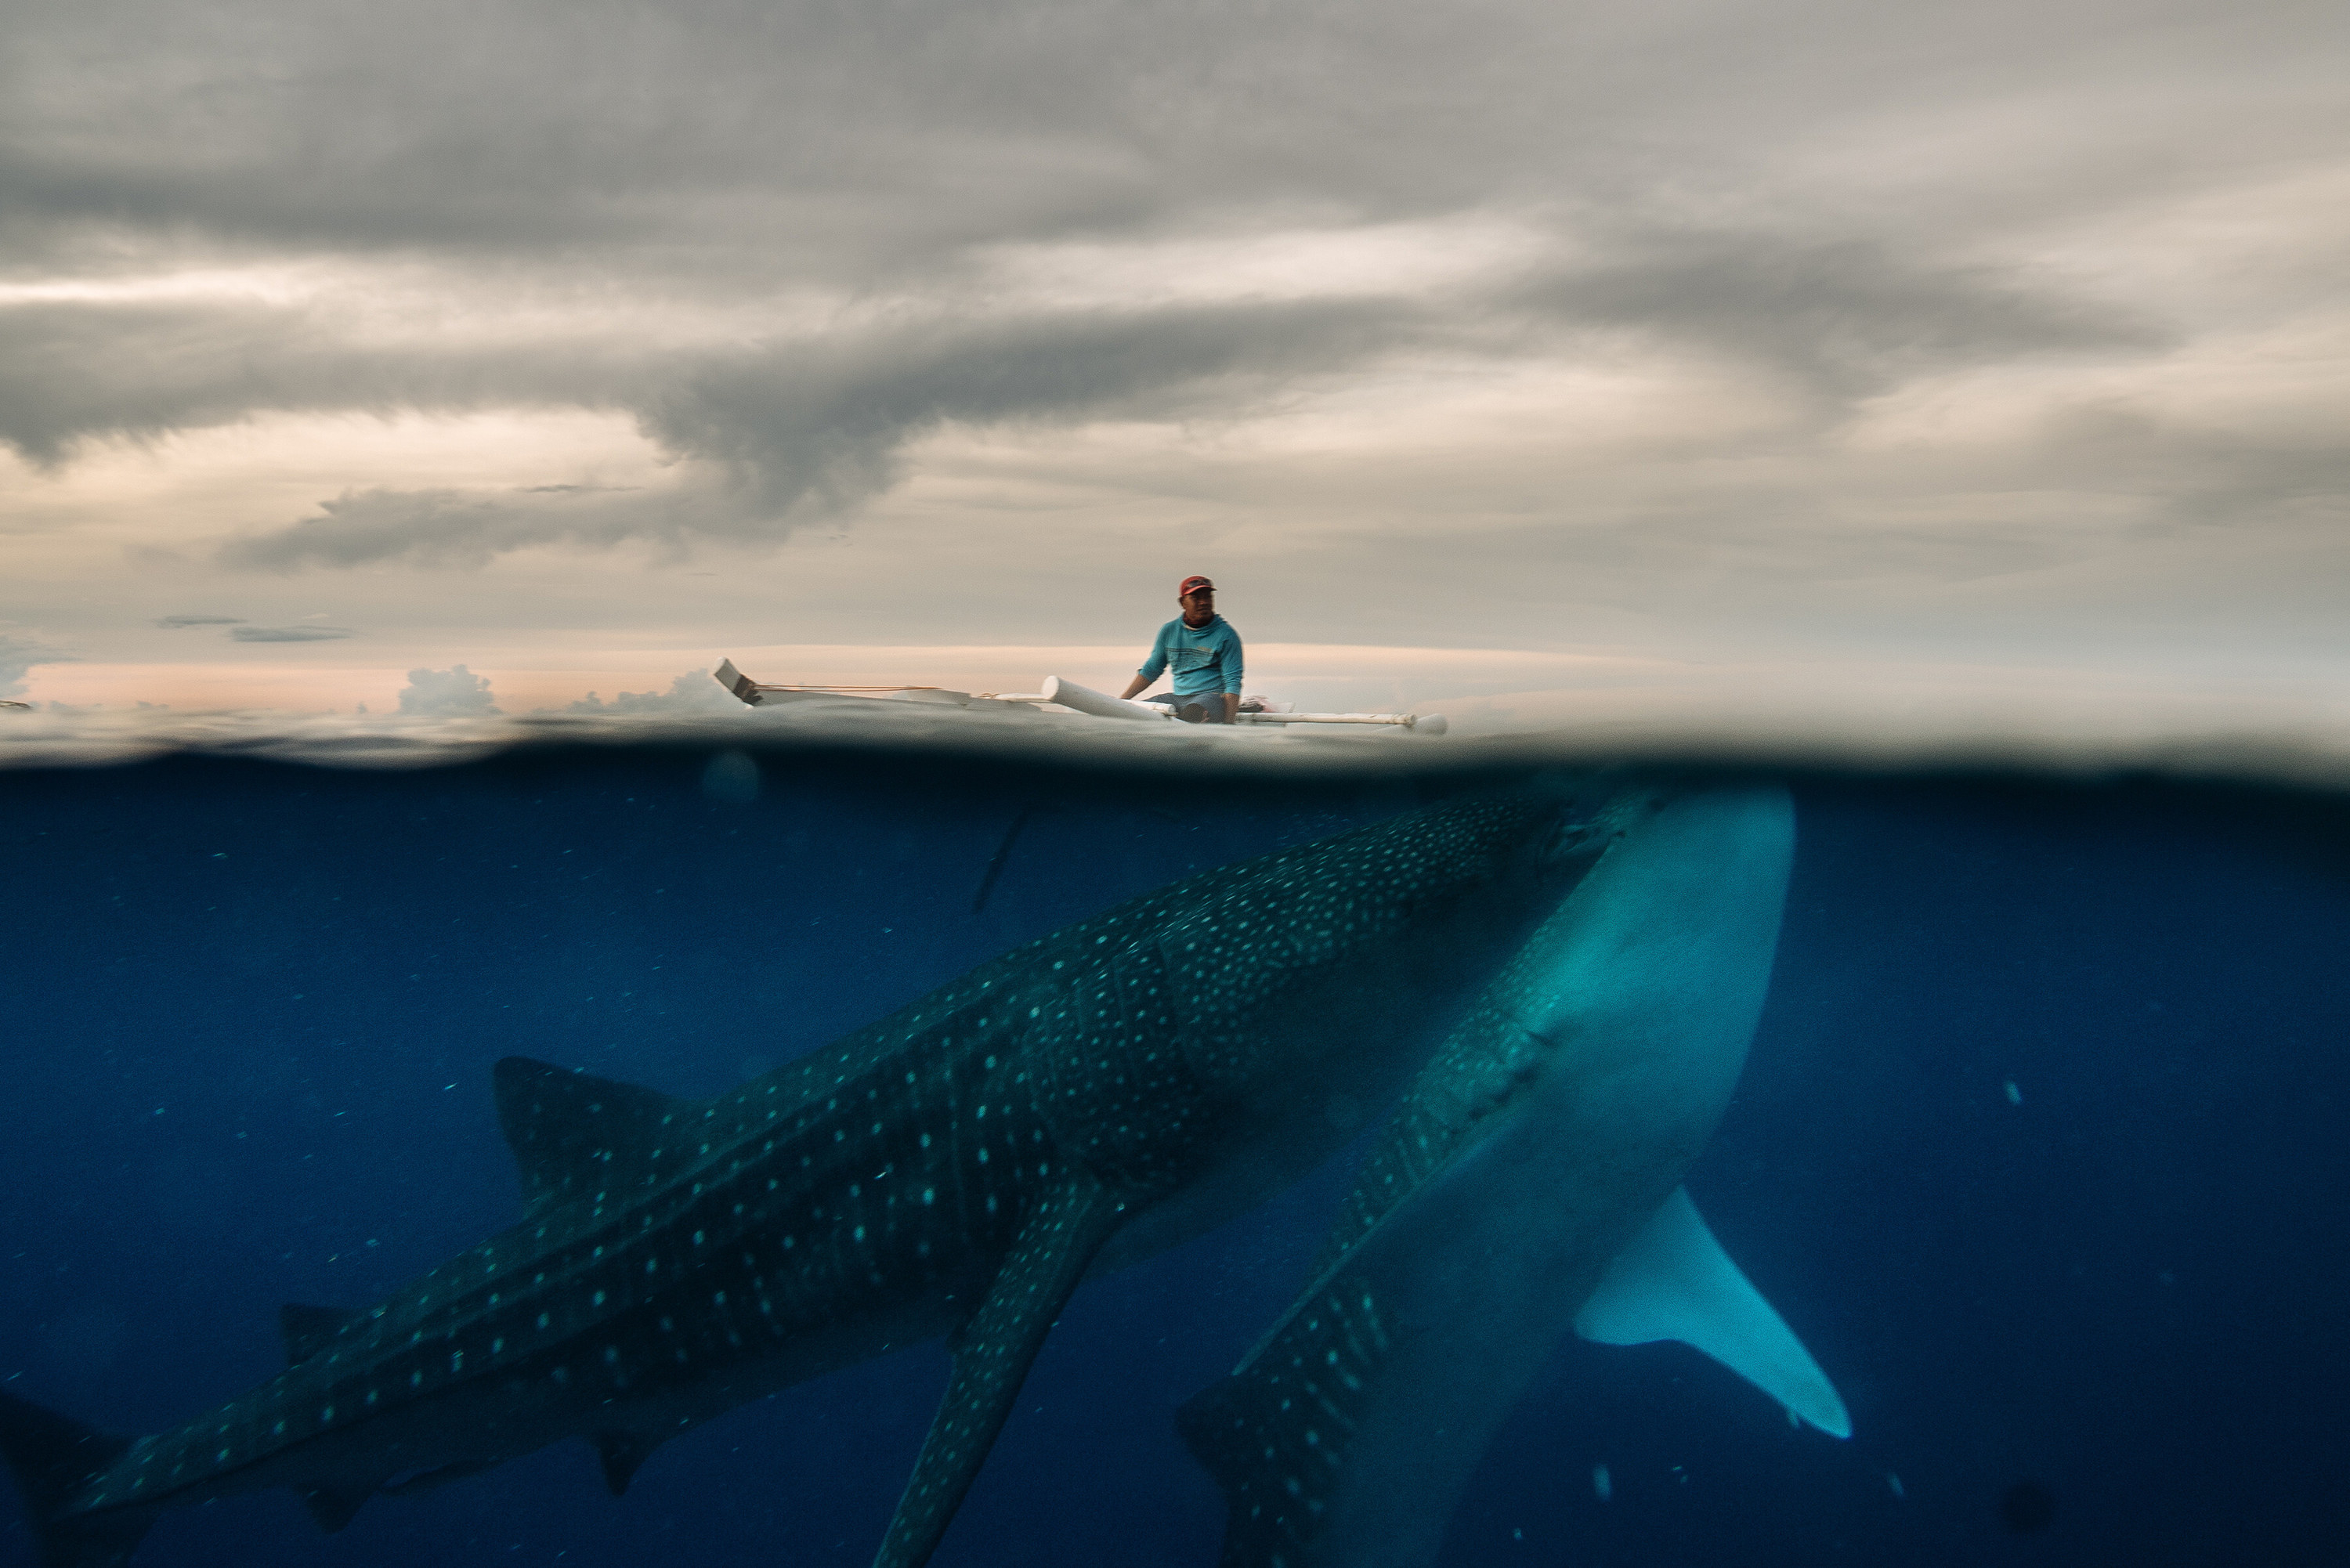 A pair of giant whales, seen beneath the surface, comes up to a man fishing in a boat